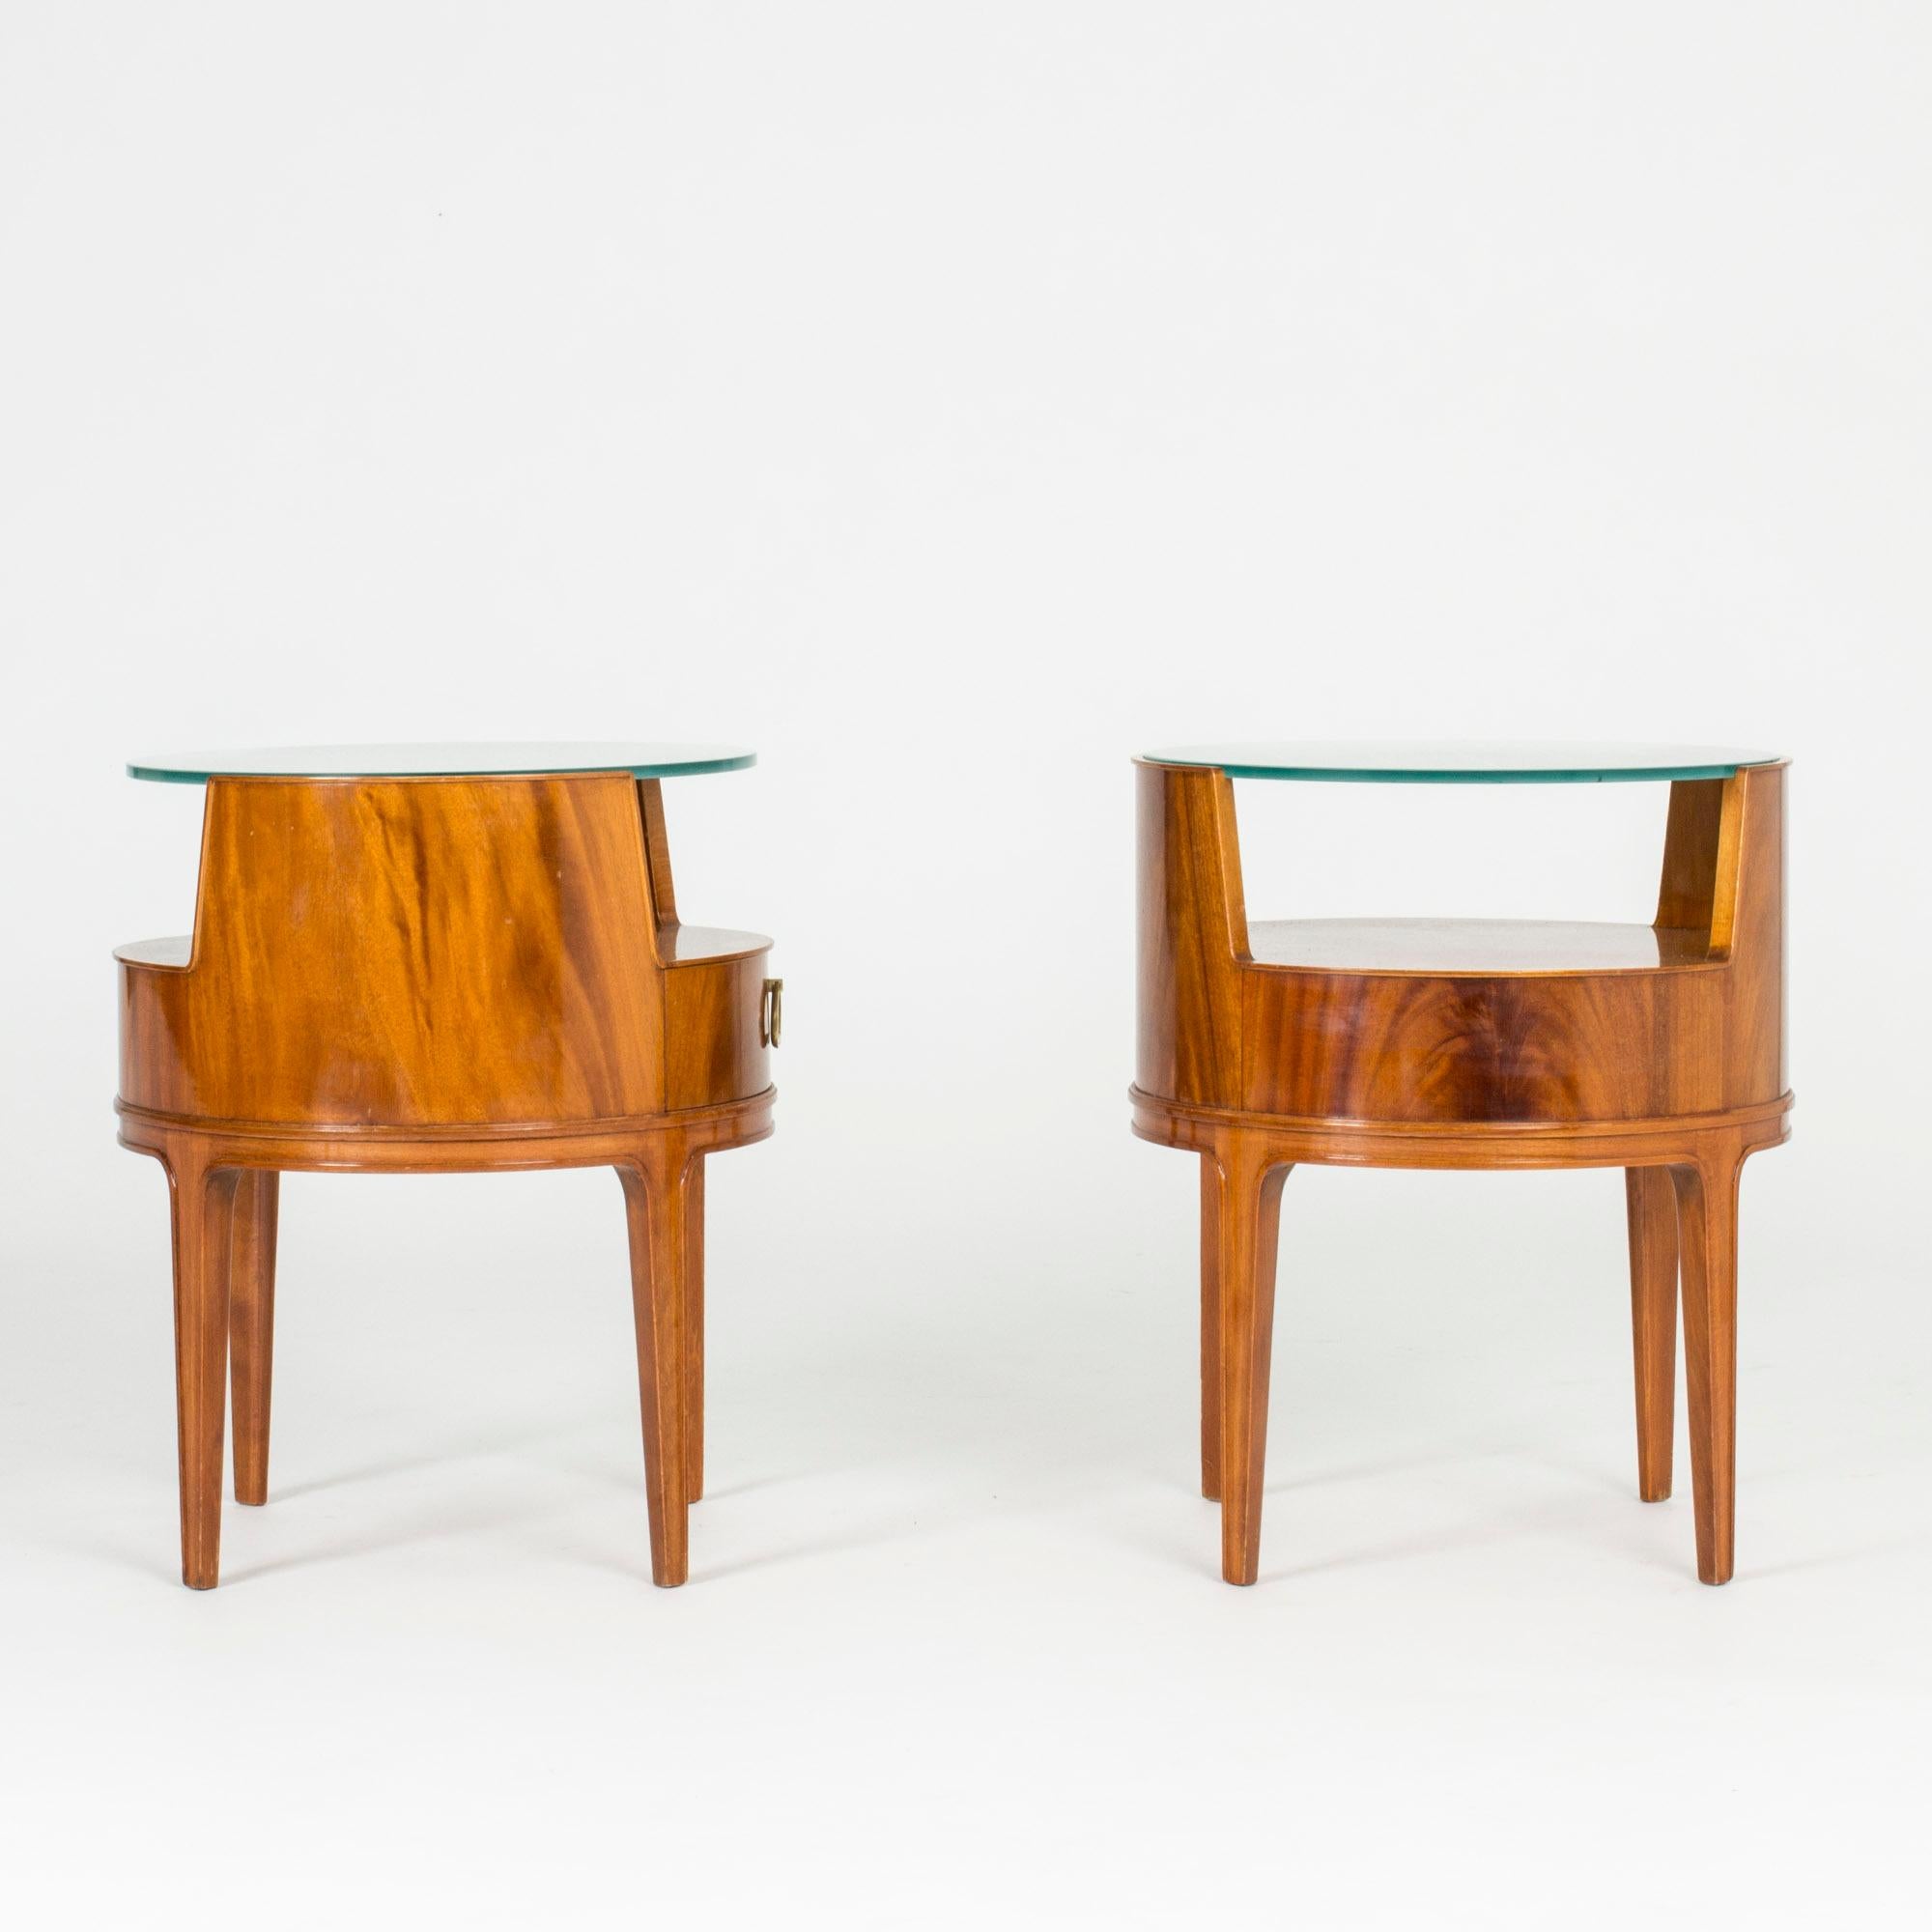 Scandinavian Modern Pair of Mahogany Side Tables by Axel Larsson